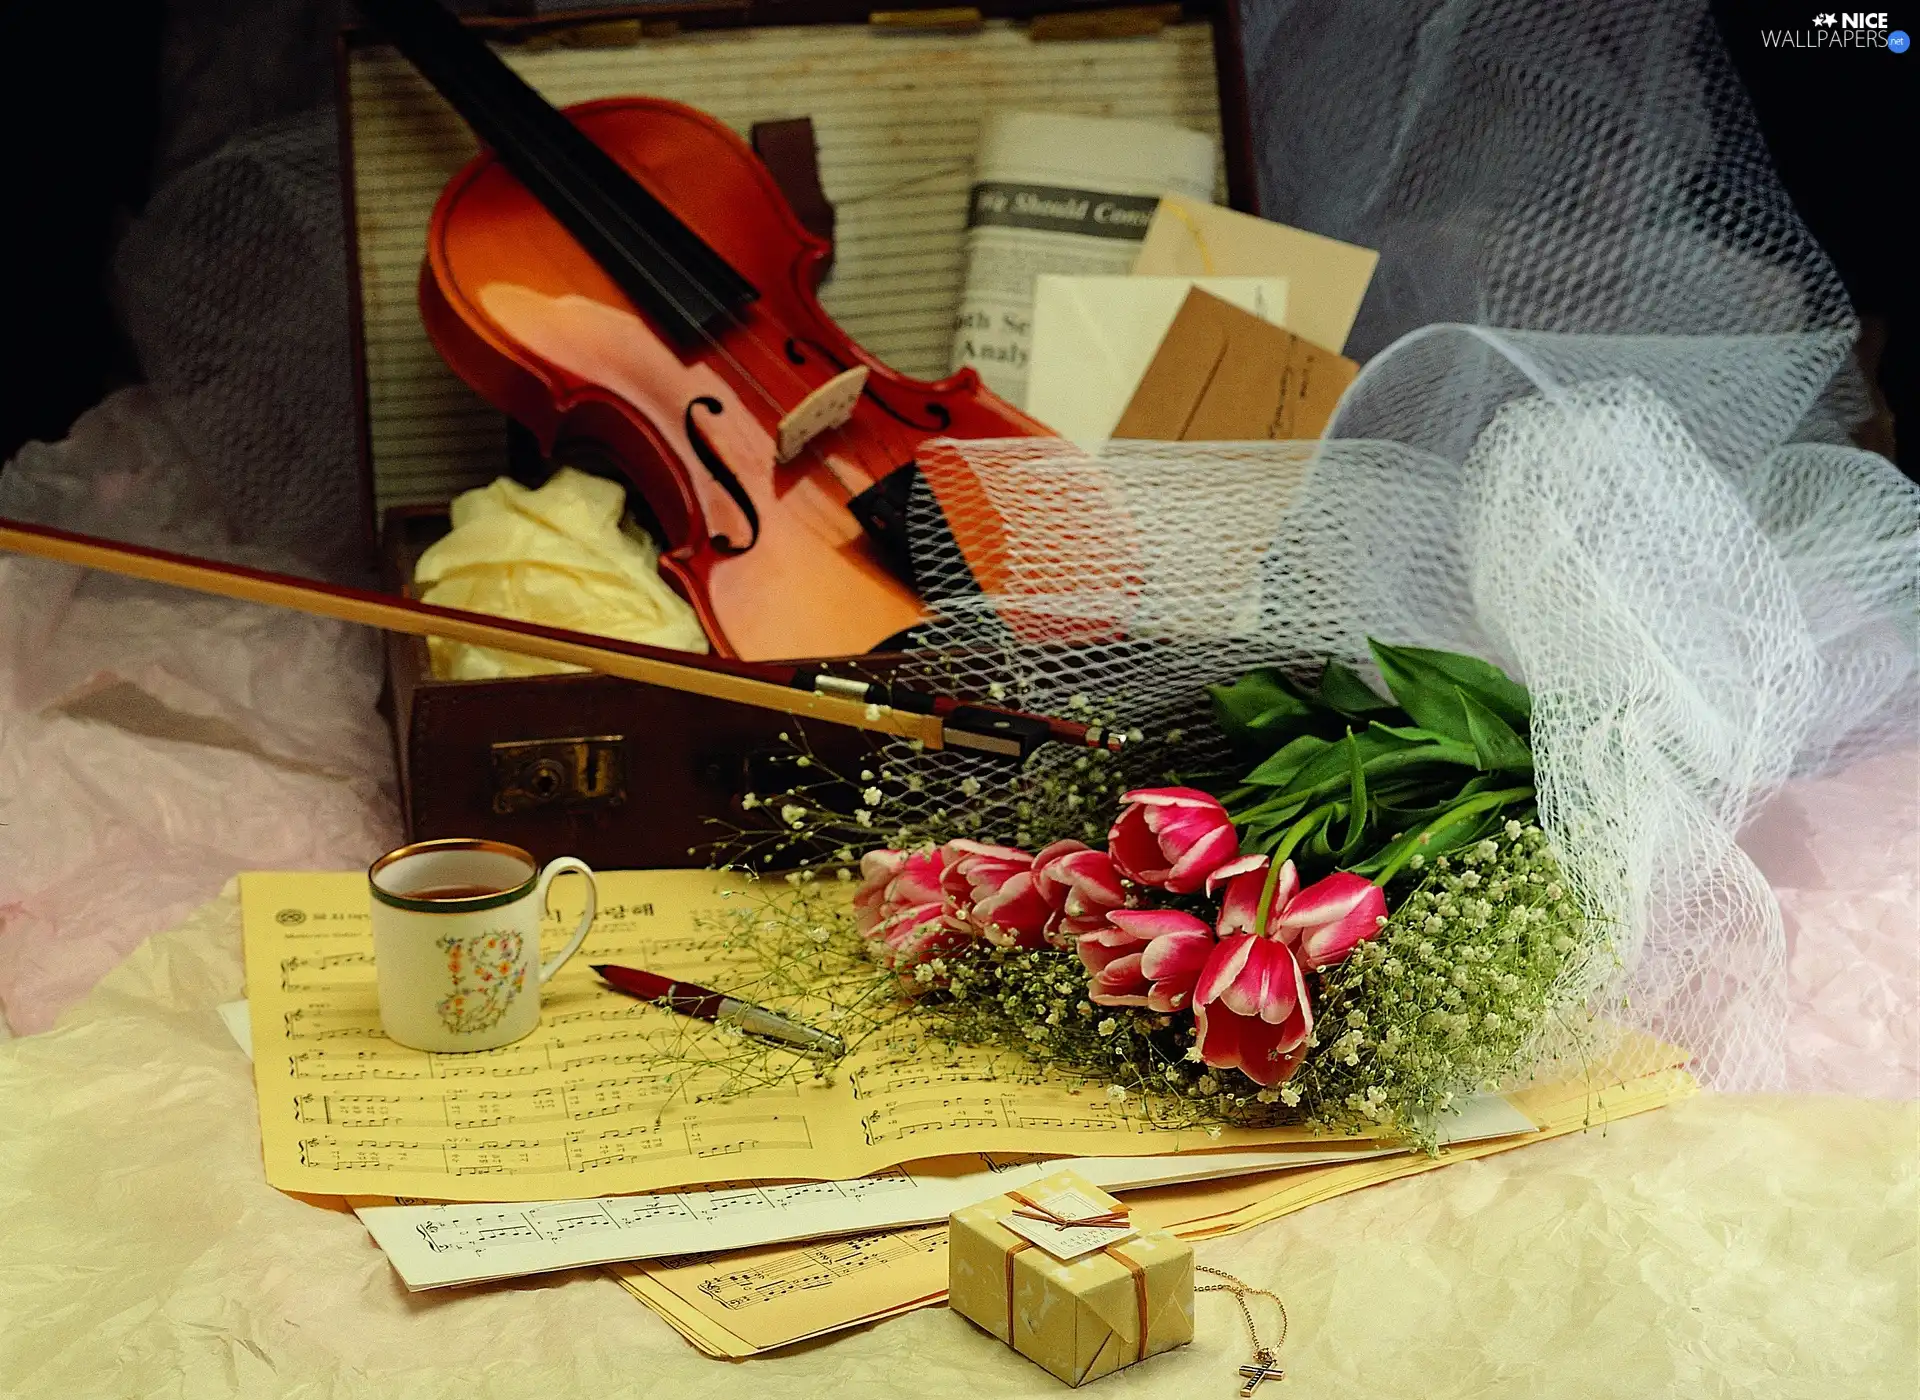 violin, Flowers, Tunes, bow